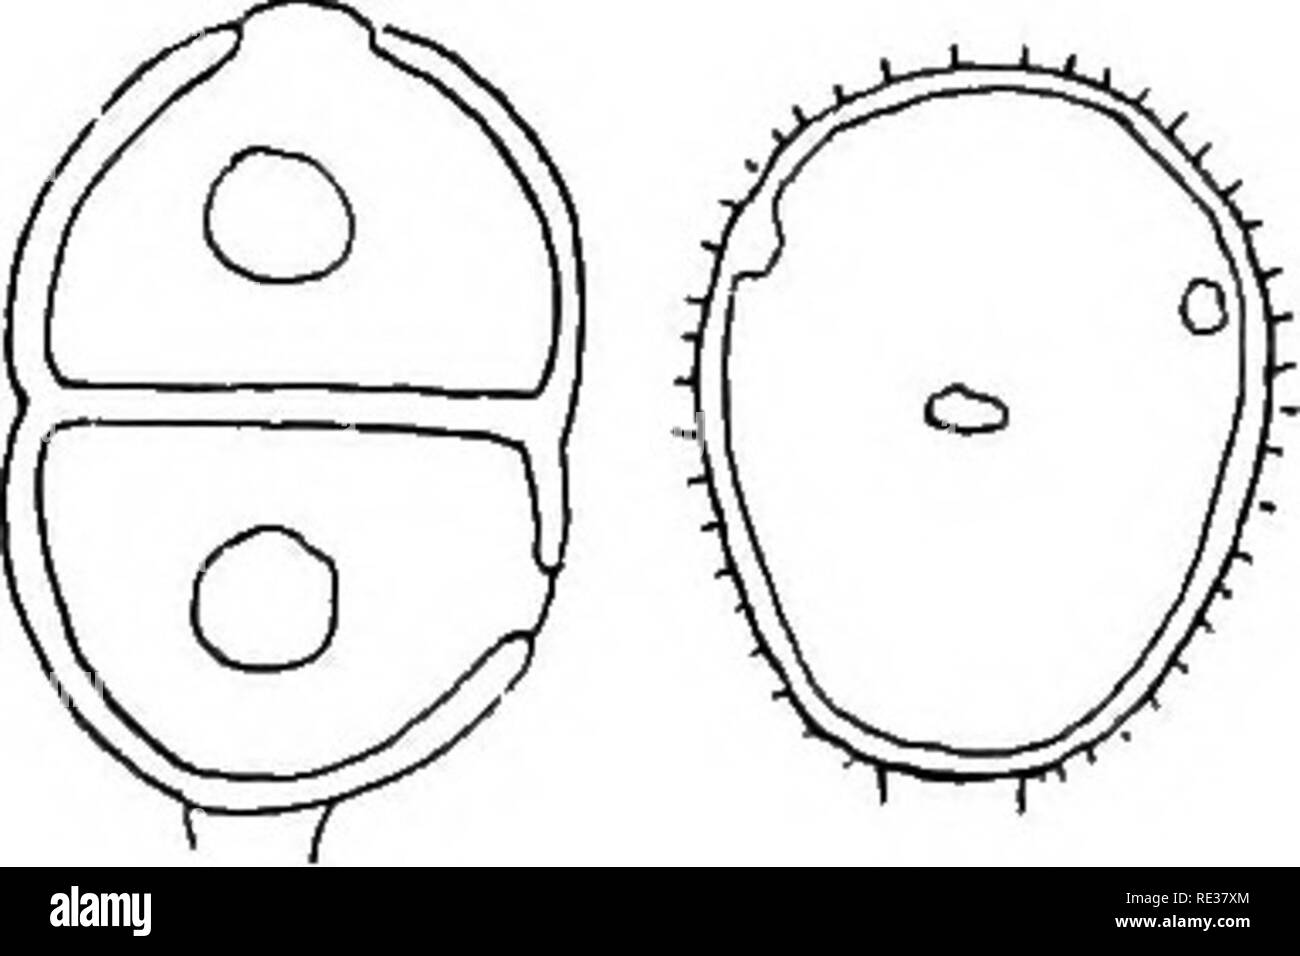 . The British rust fungi (Uredinales) their biology and classification. Rust fungi. Fig. 94. P. Girsii. Teleuto- spores, on C. palustre, from Hereford. Fig. 95. P. Girsii. Teleuto- apore and uredospore, on G. lanceolatum. Teleutospores. Sori mostly hypophyllous only, similar, but blackish-brown or black; spores ellipsoid or somewhat obovate, rounded at both ends, not thickened above, hardly constricted, verruculose or merely punctate, chestnut-brown, 25—38 x 17—25 jj,; epispore thin; pedicels hyaline, very short: On Girsium, Dupplin Castle, Perth (M. C. Cooke). On G. pratense, Ballyquirke Lake Stock Photo